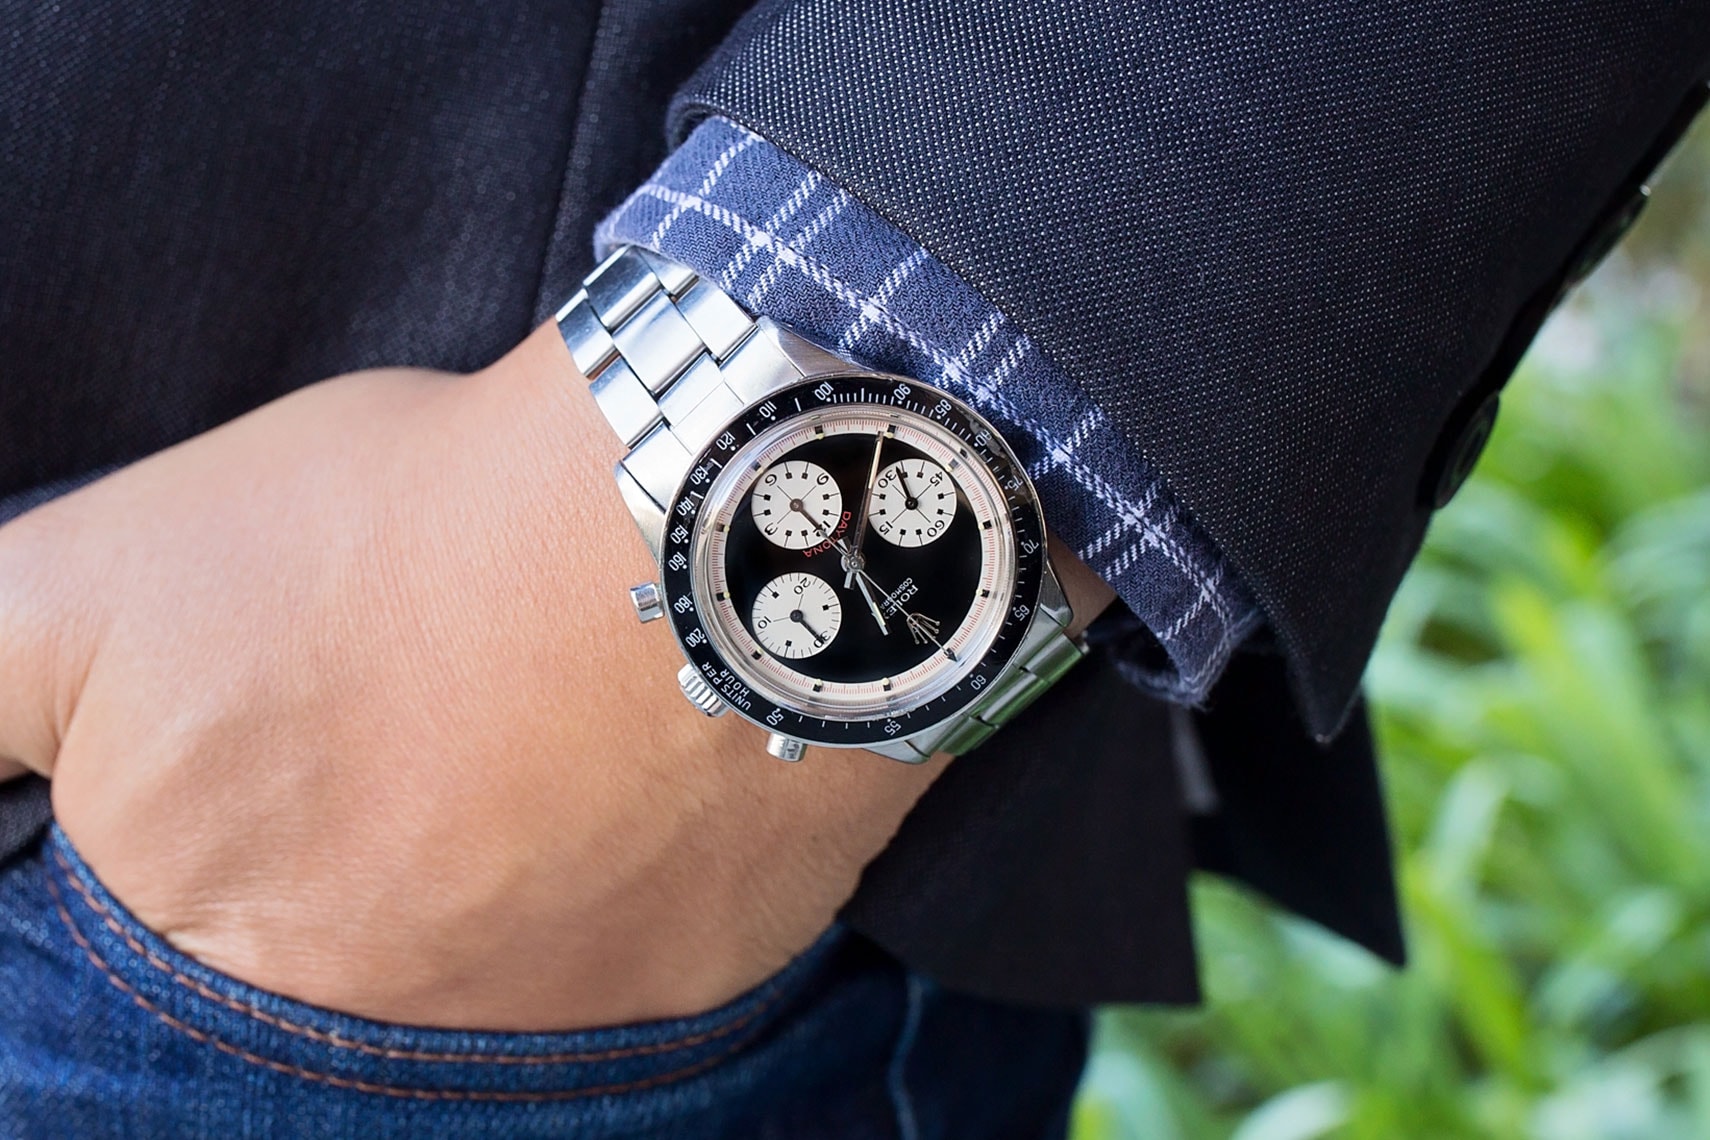 Rolex Daytona ロレックス 希少モデル “Paul Newman” Found in Couch Bob's Watches ポール ニューマン デイトナ Swiss watches Rolex Cosmograph vintage watch  オークション